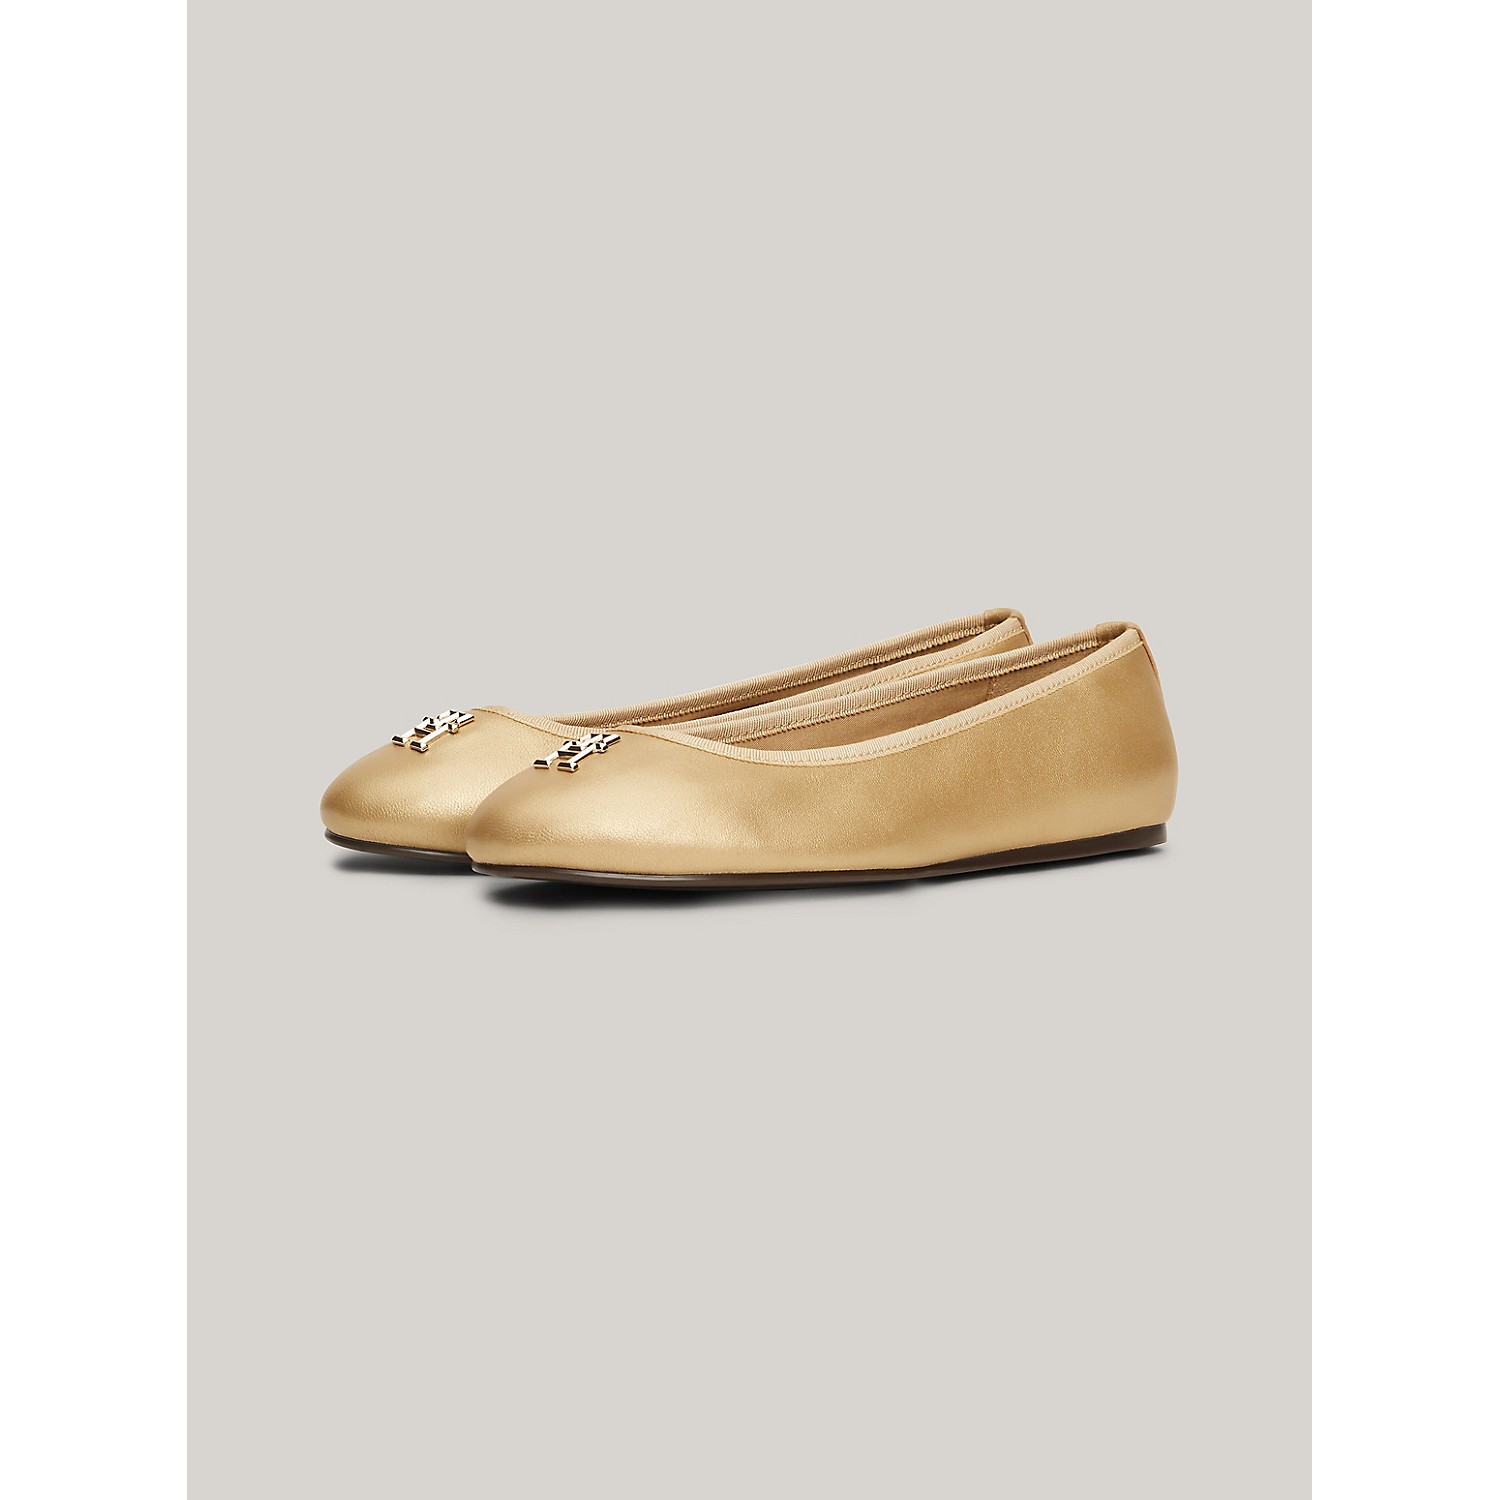 TOMMY HILFIGER TH Logo Luxe Leather Ballerina Flat